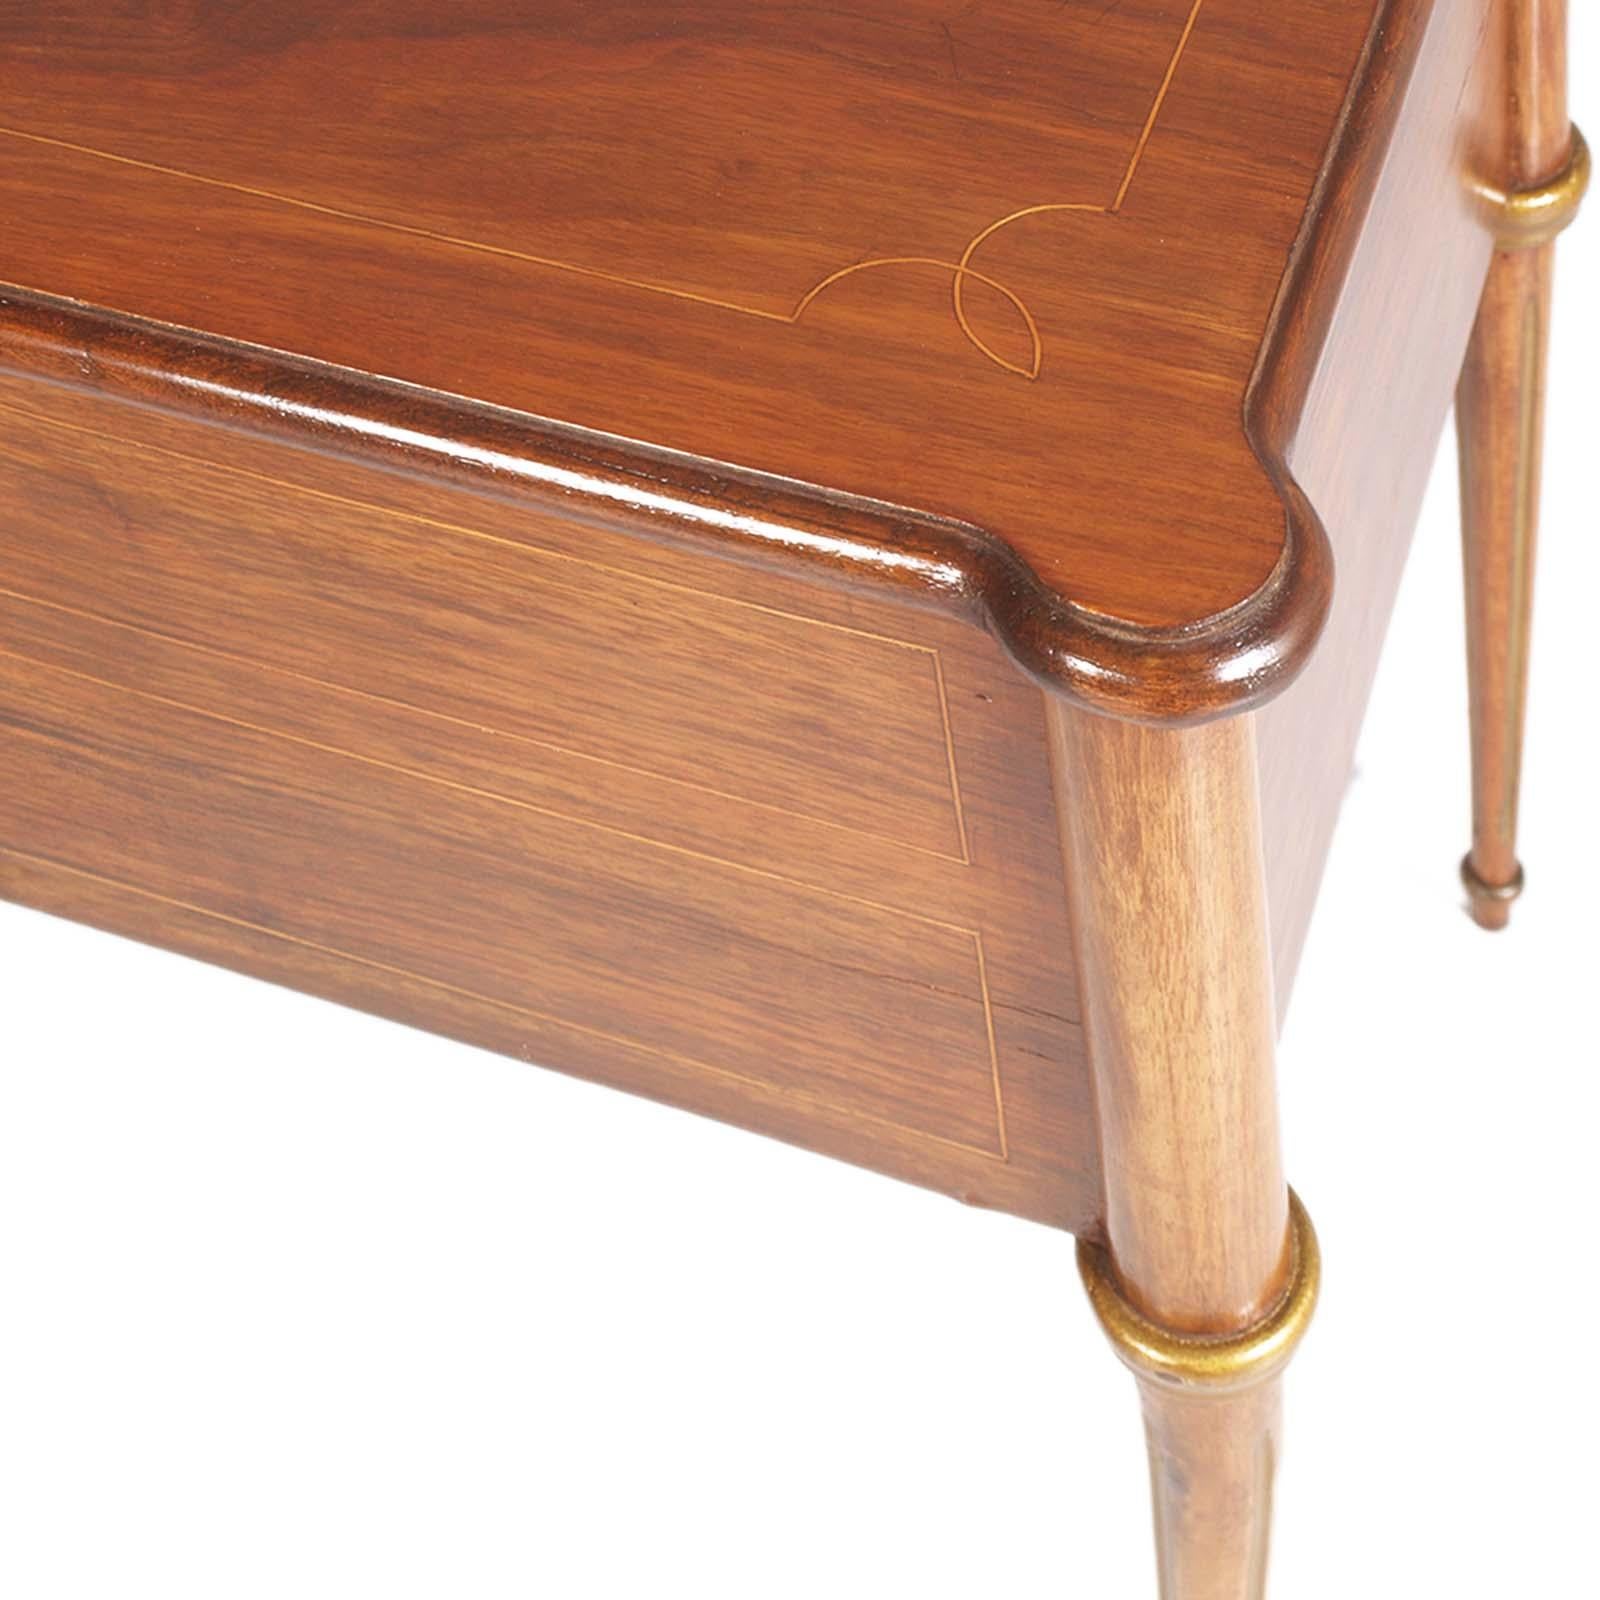 Early 20th Century Writing Desk in Walnut with Inlay by Meroni & Fossati For Sale 2